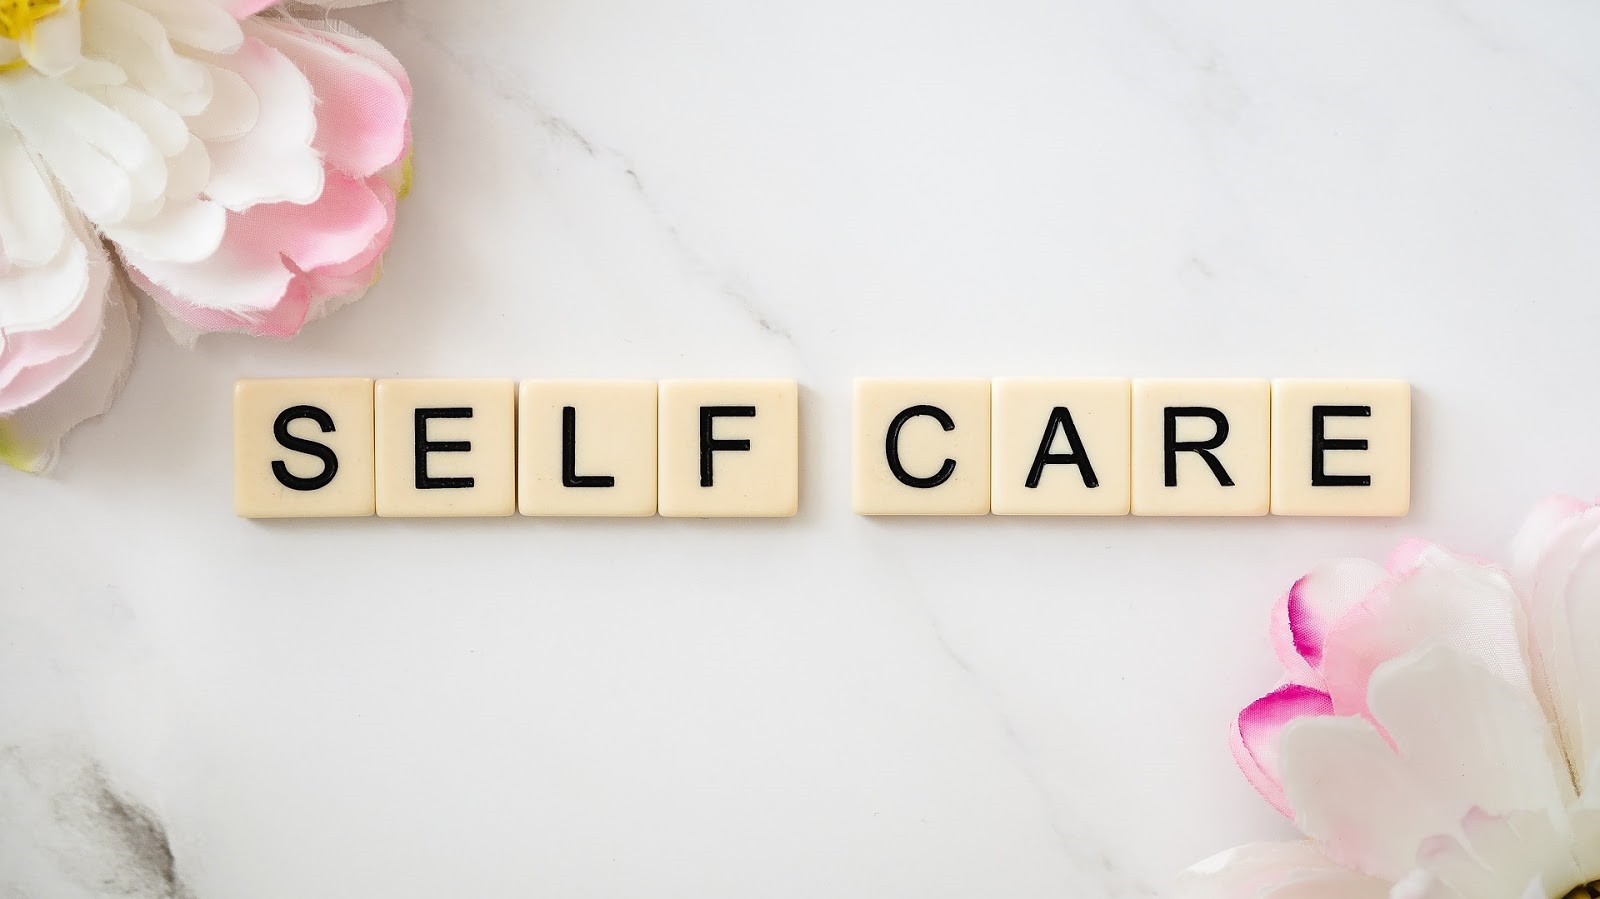 Self-care, prioritising for good health, self-care and wellbeing, mental and emotional health connected to self-care